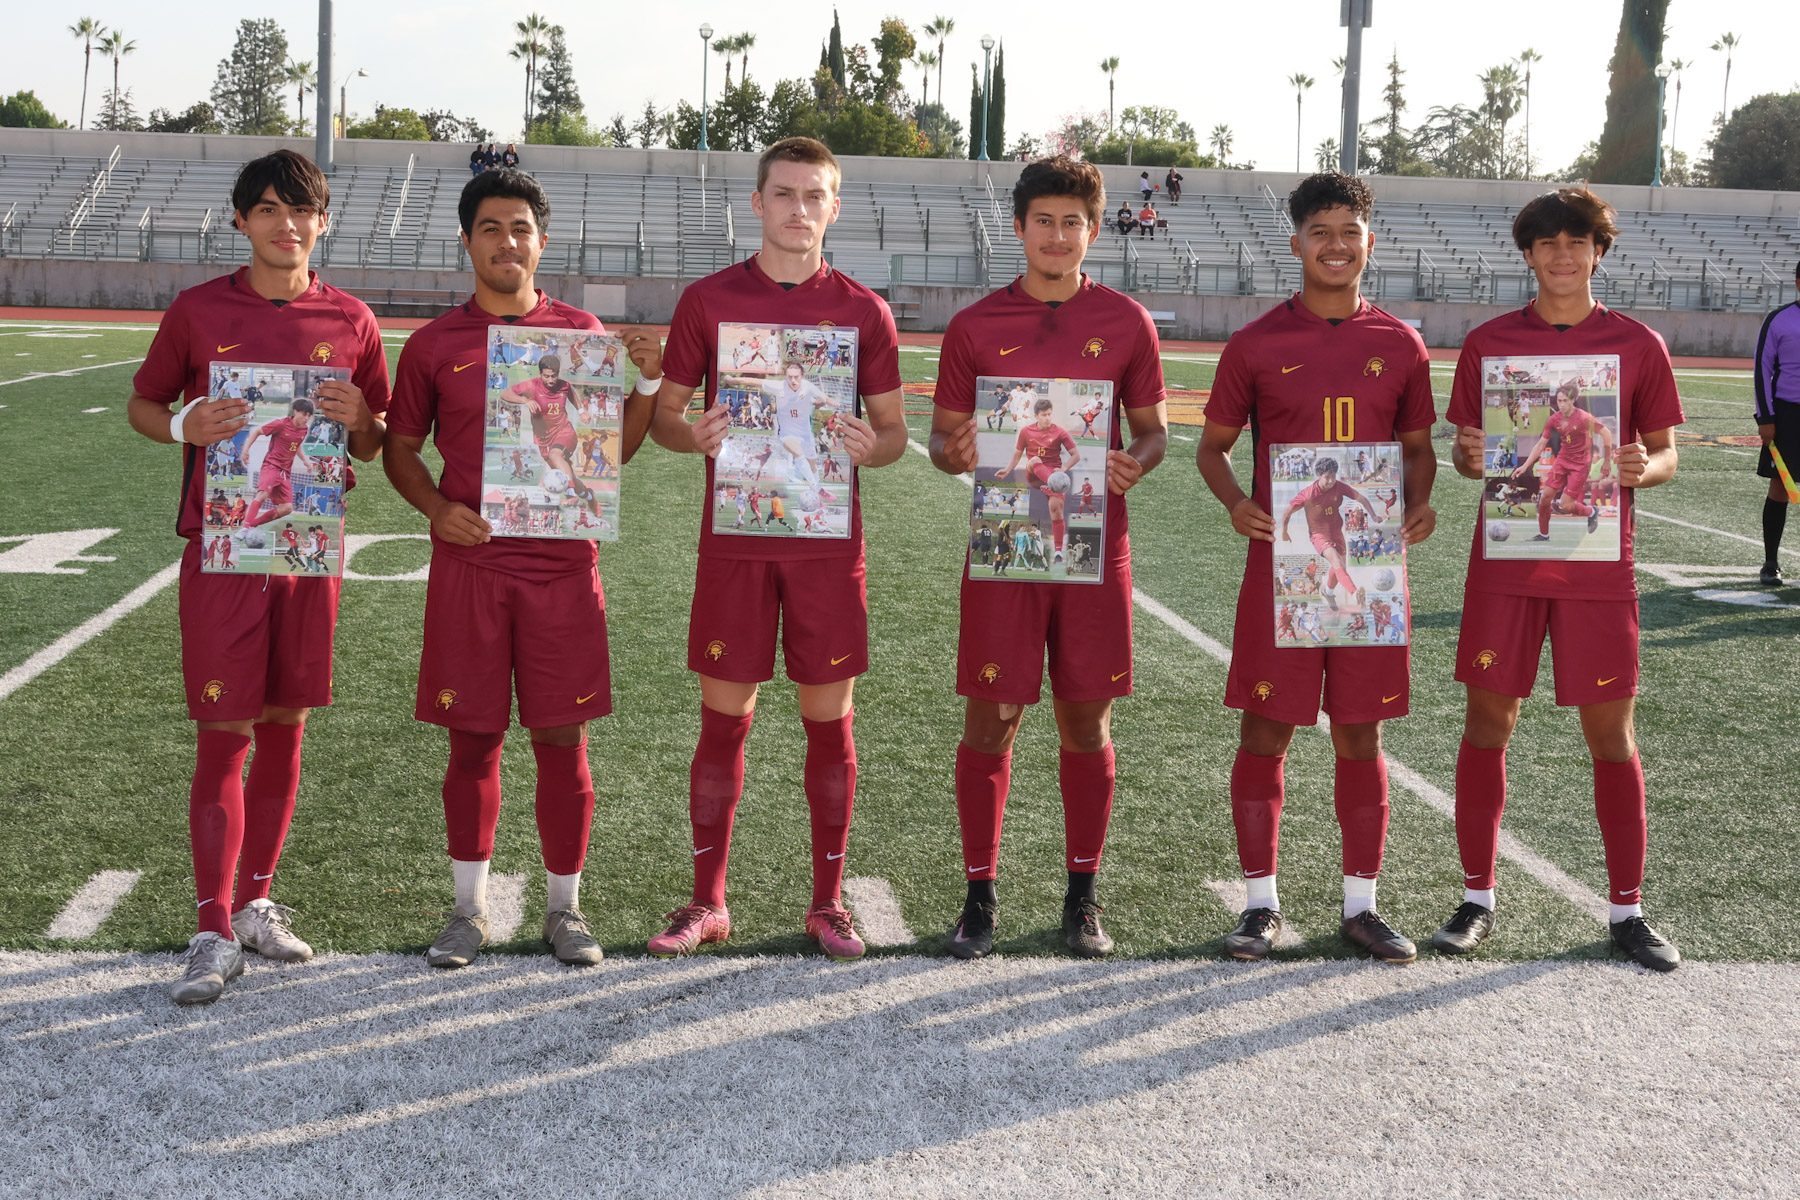 PCC sophomores were honored prior to last Friday's win (photo by Richard Quinton).